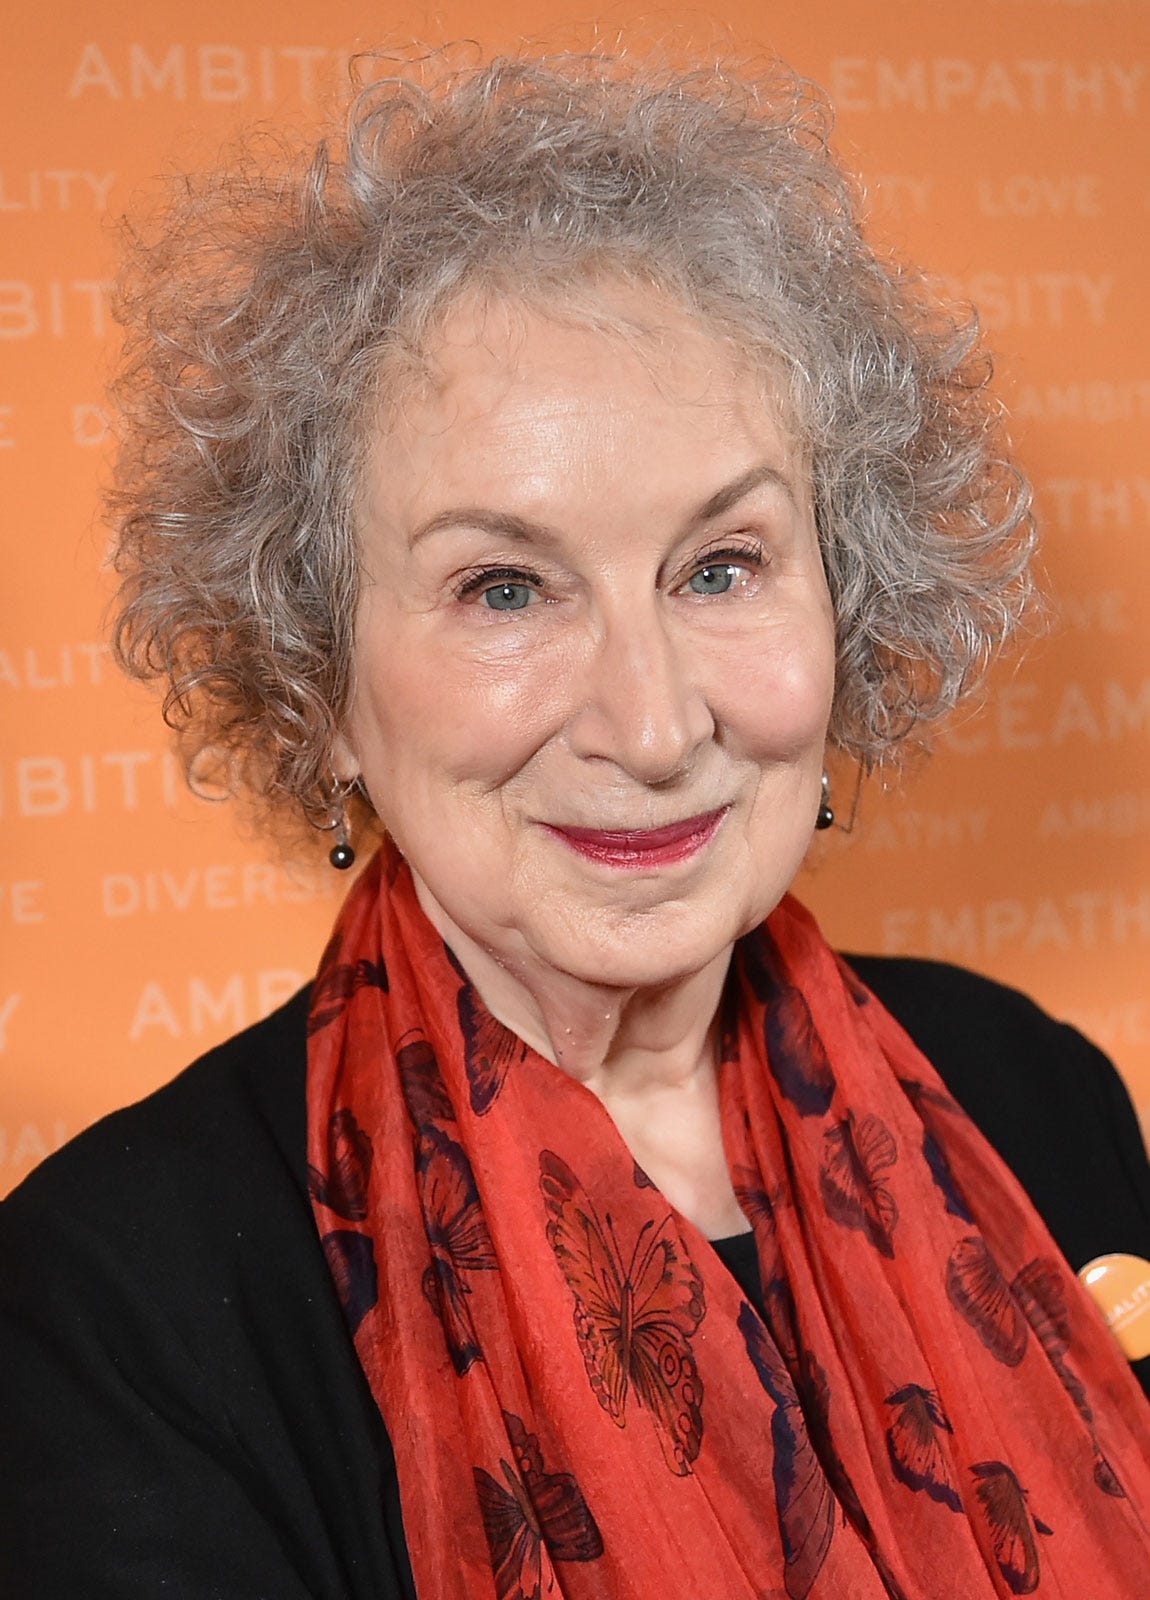 Margaret Atwood | Biography, Books, & Facts | Britannica